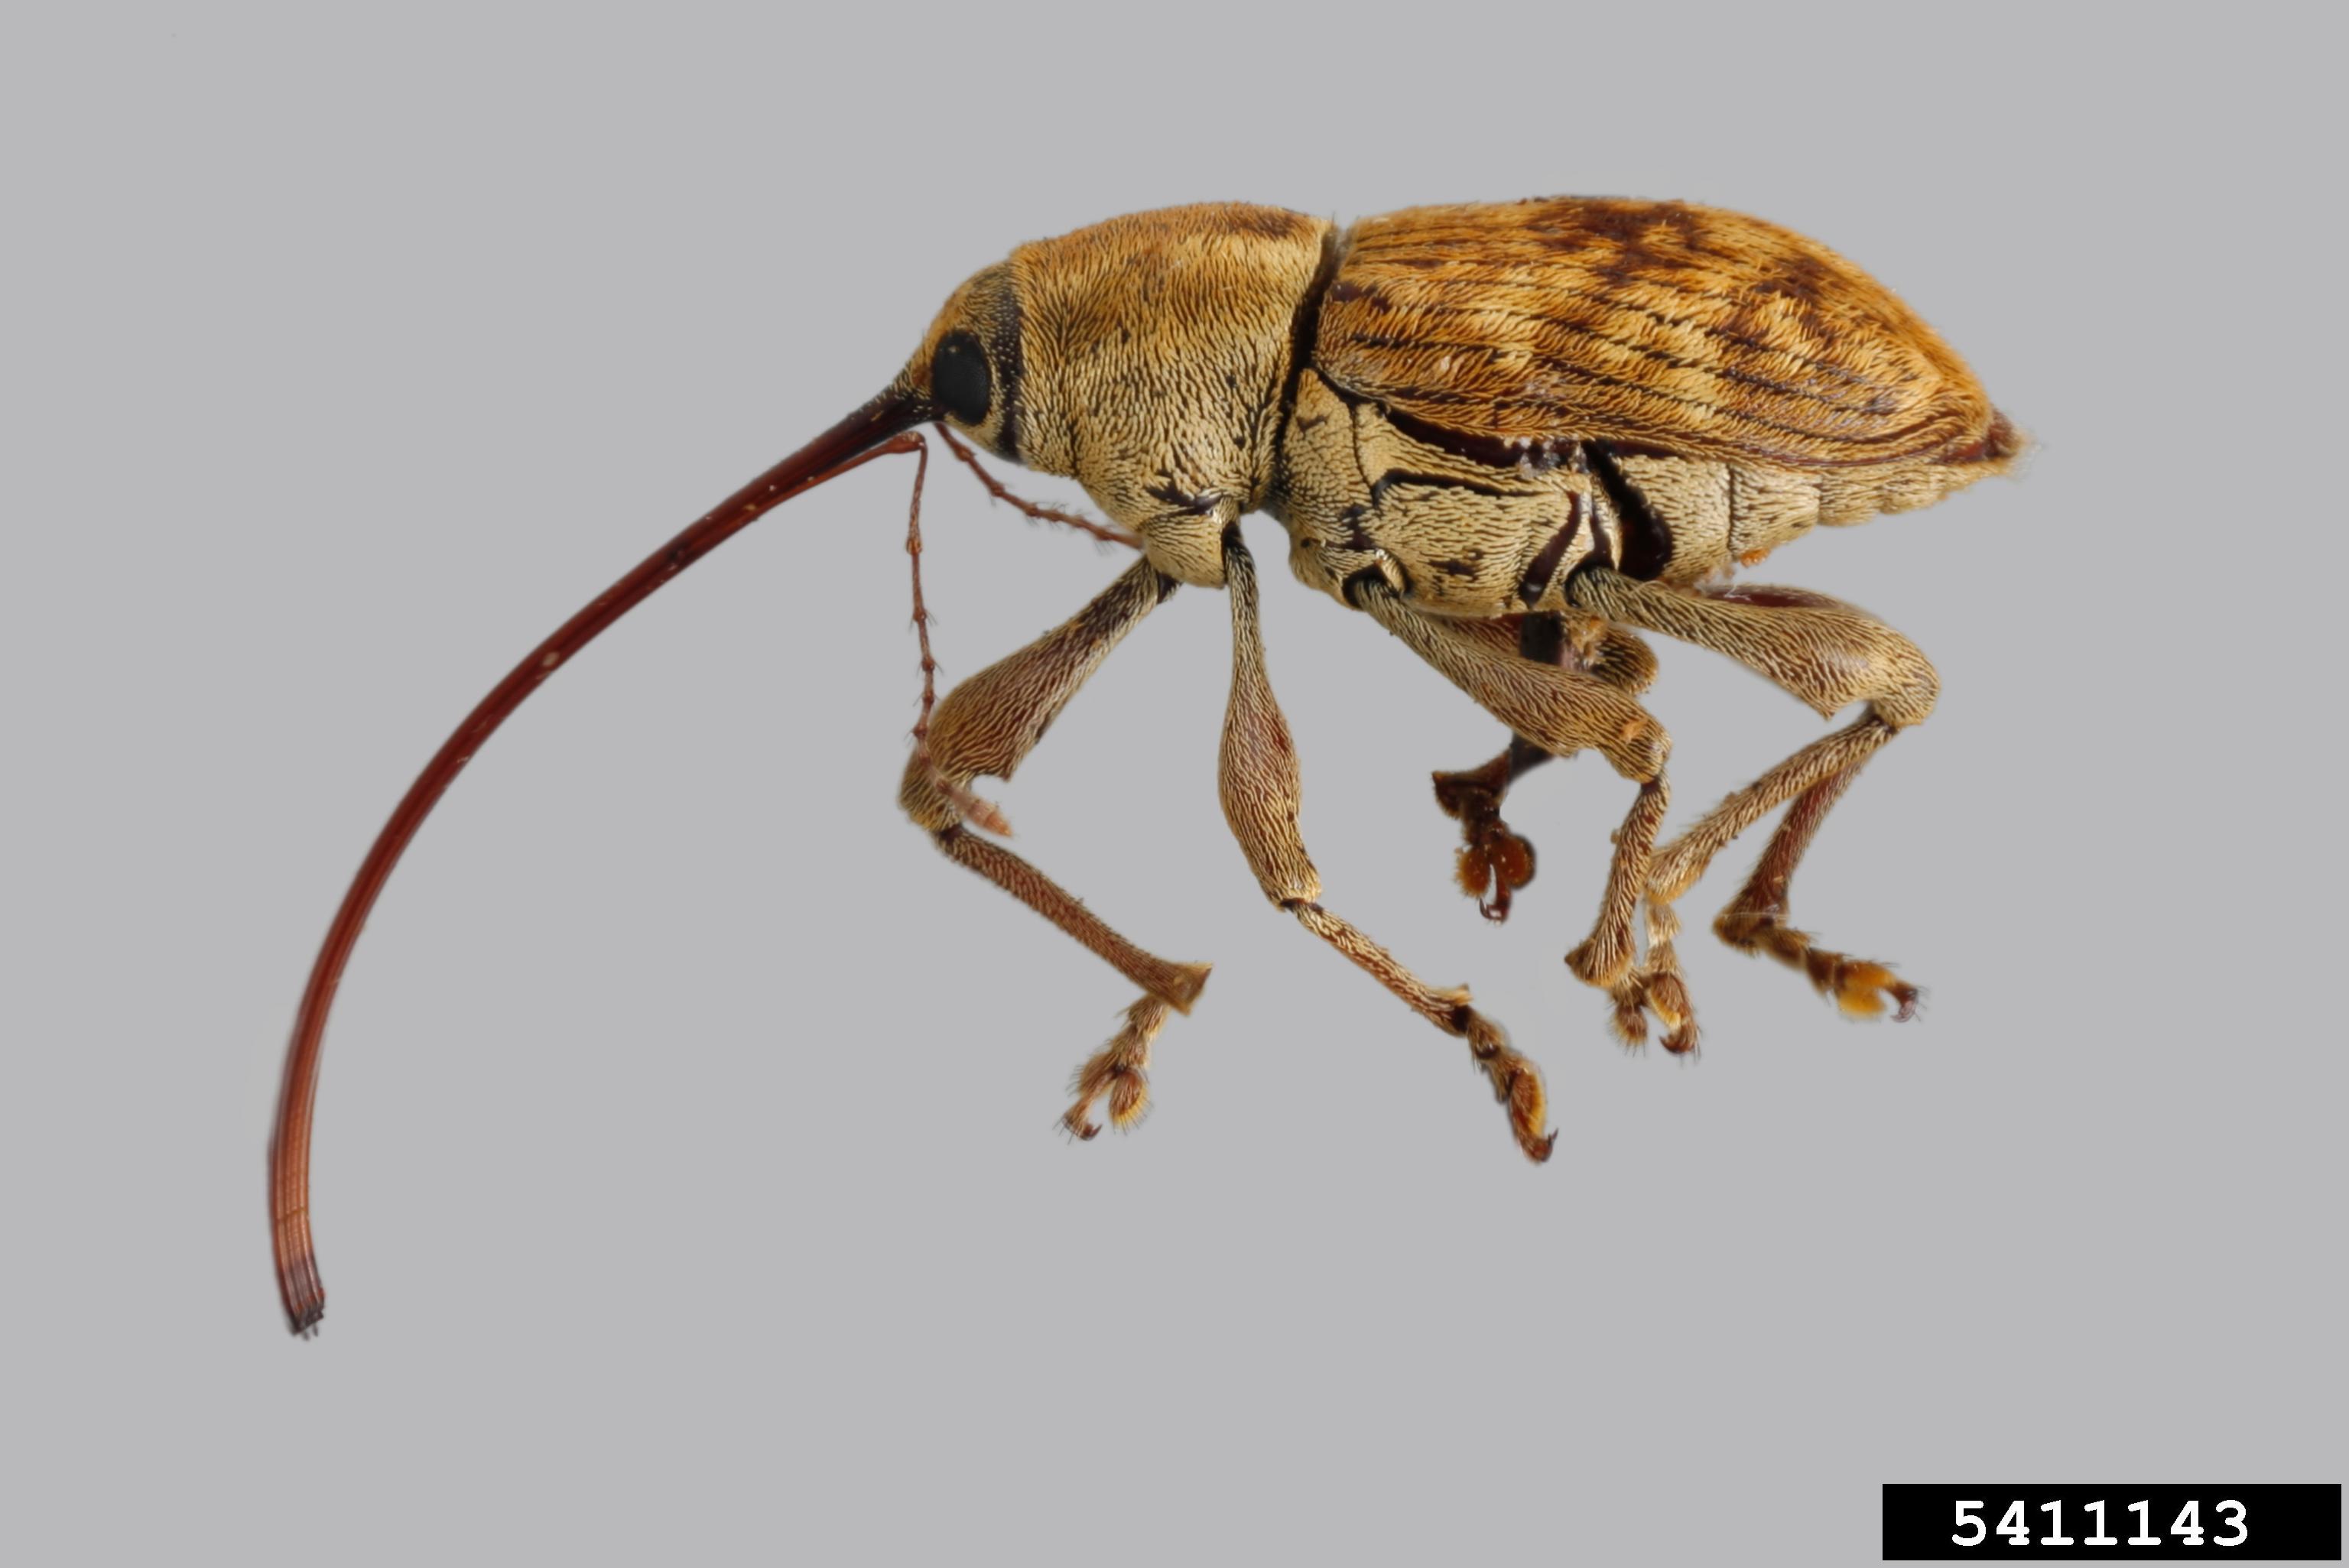 Small chestnut weevil